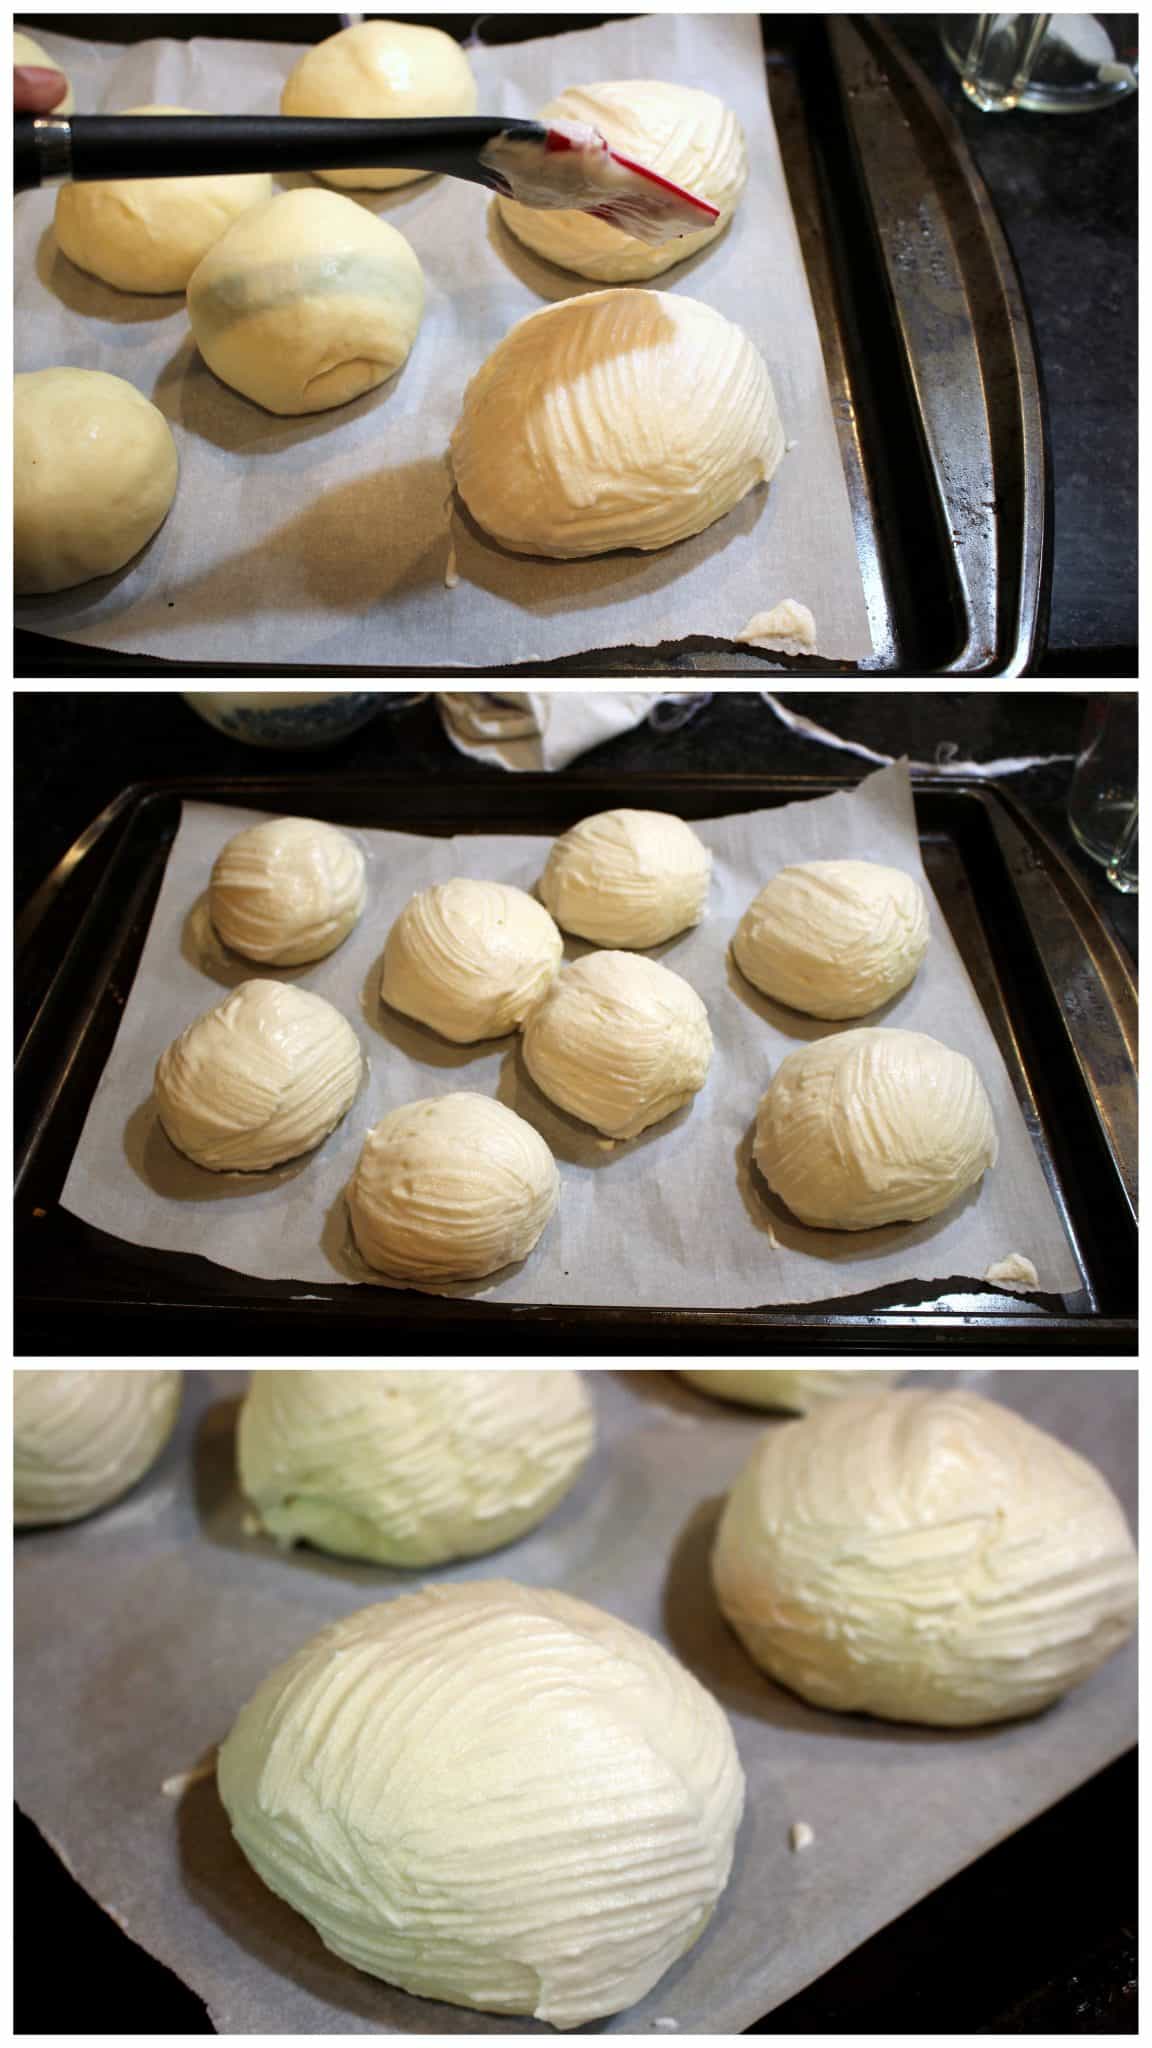 Brushing the dough balls with tiger paste for the Tijgerbrood